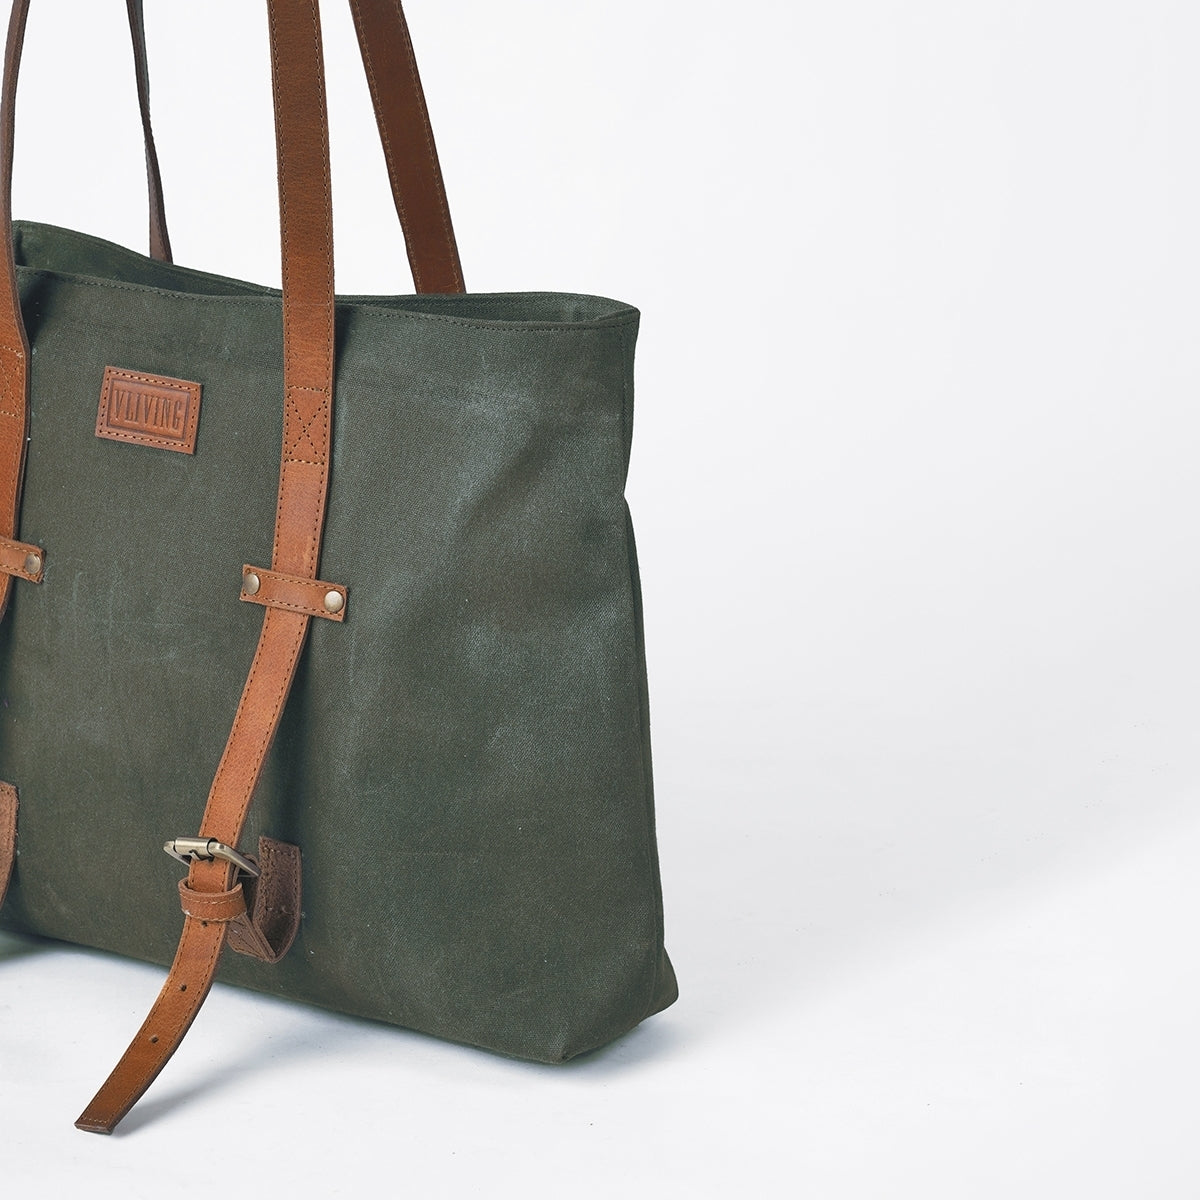 Olive Green waxed canvas yoga bag, gym bag, leather adjustable straps, 16X13X4 inches